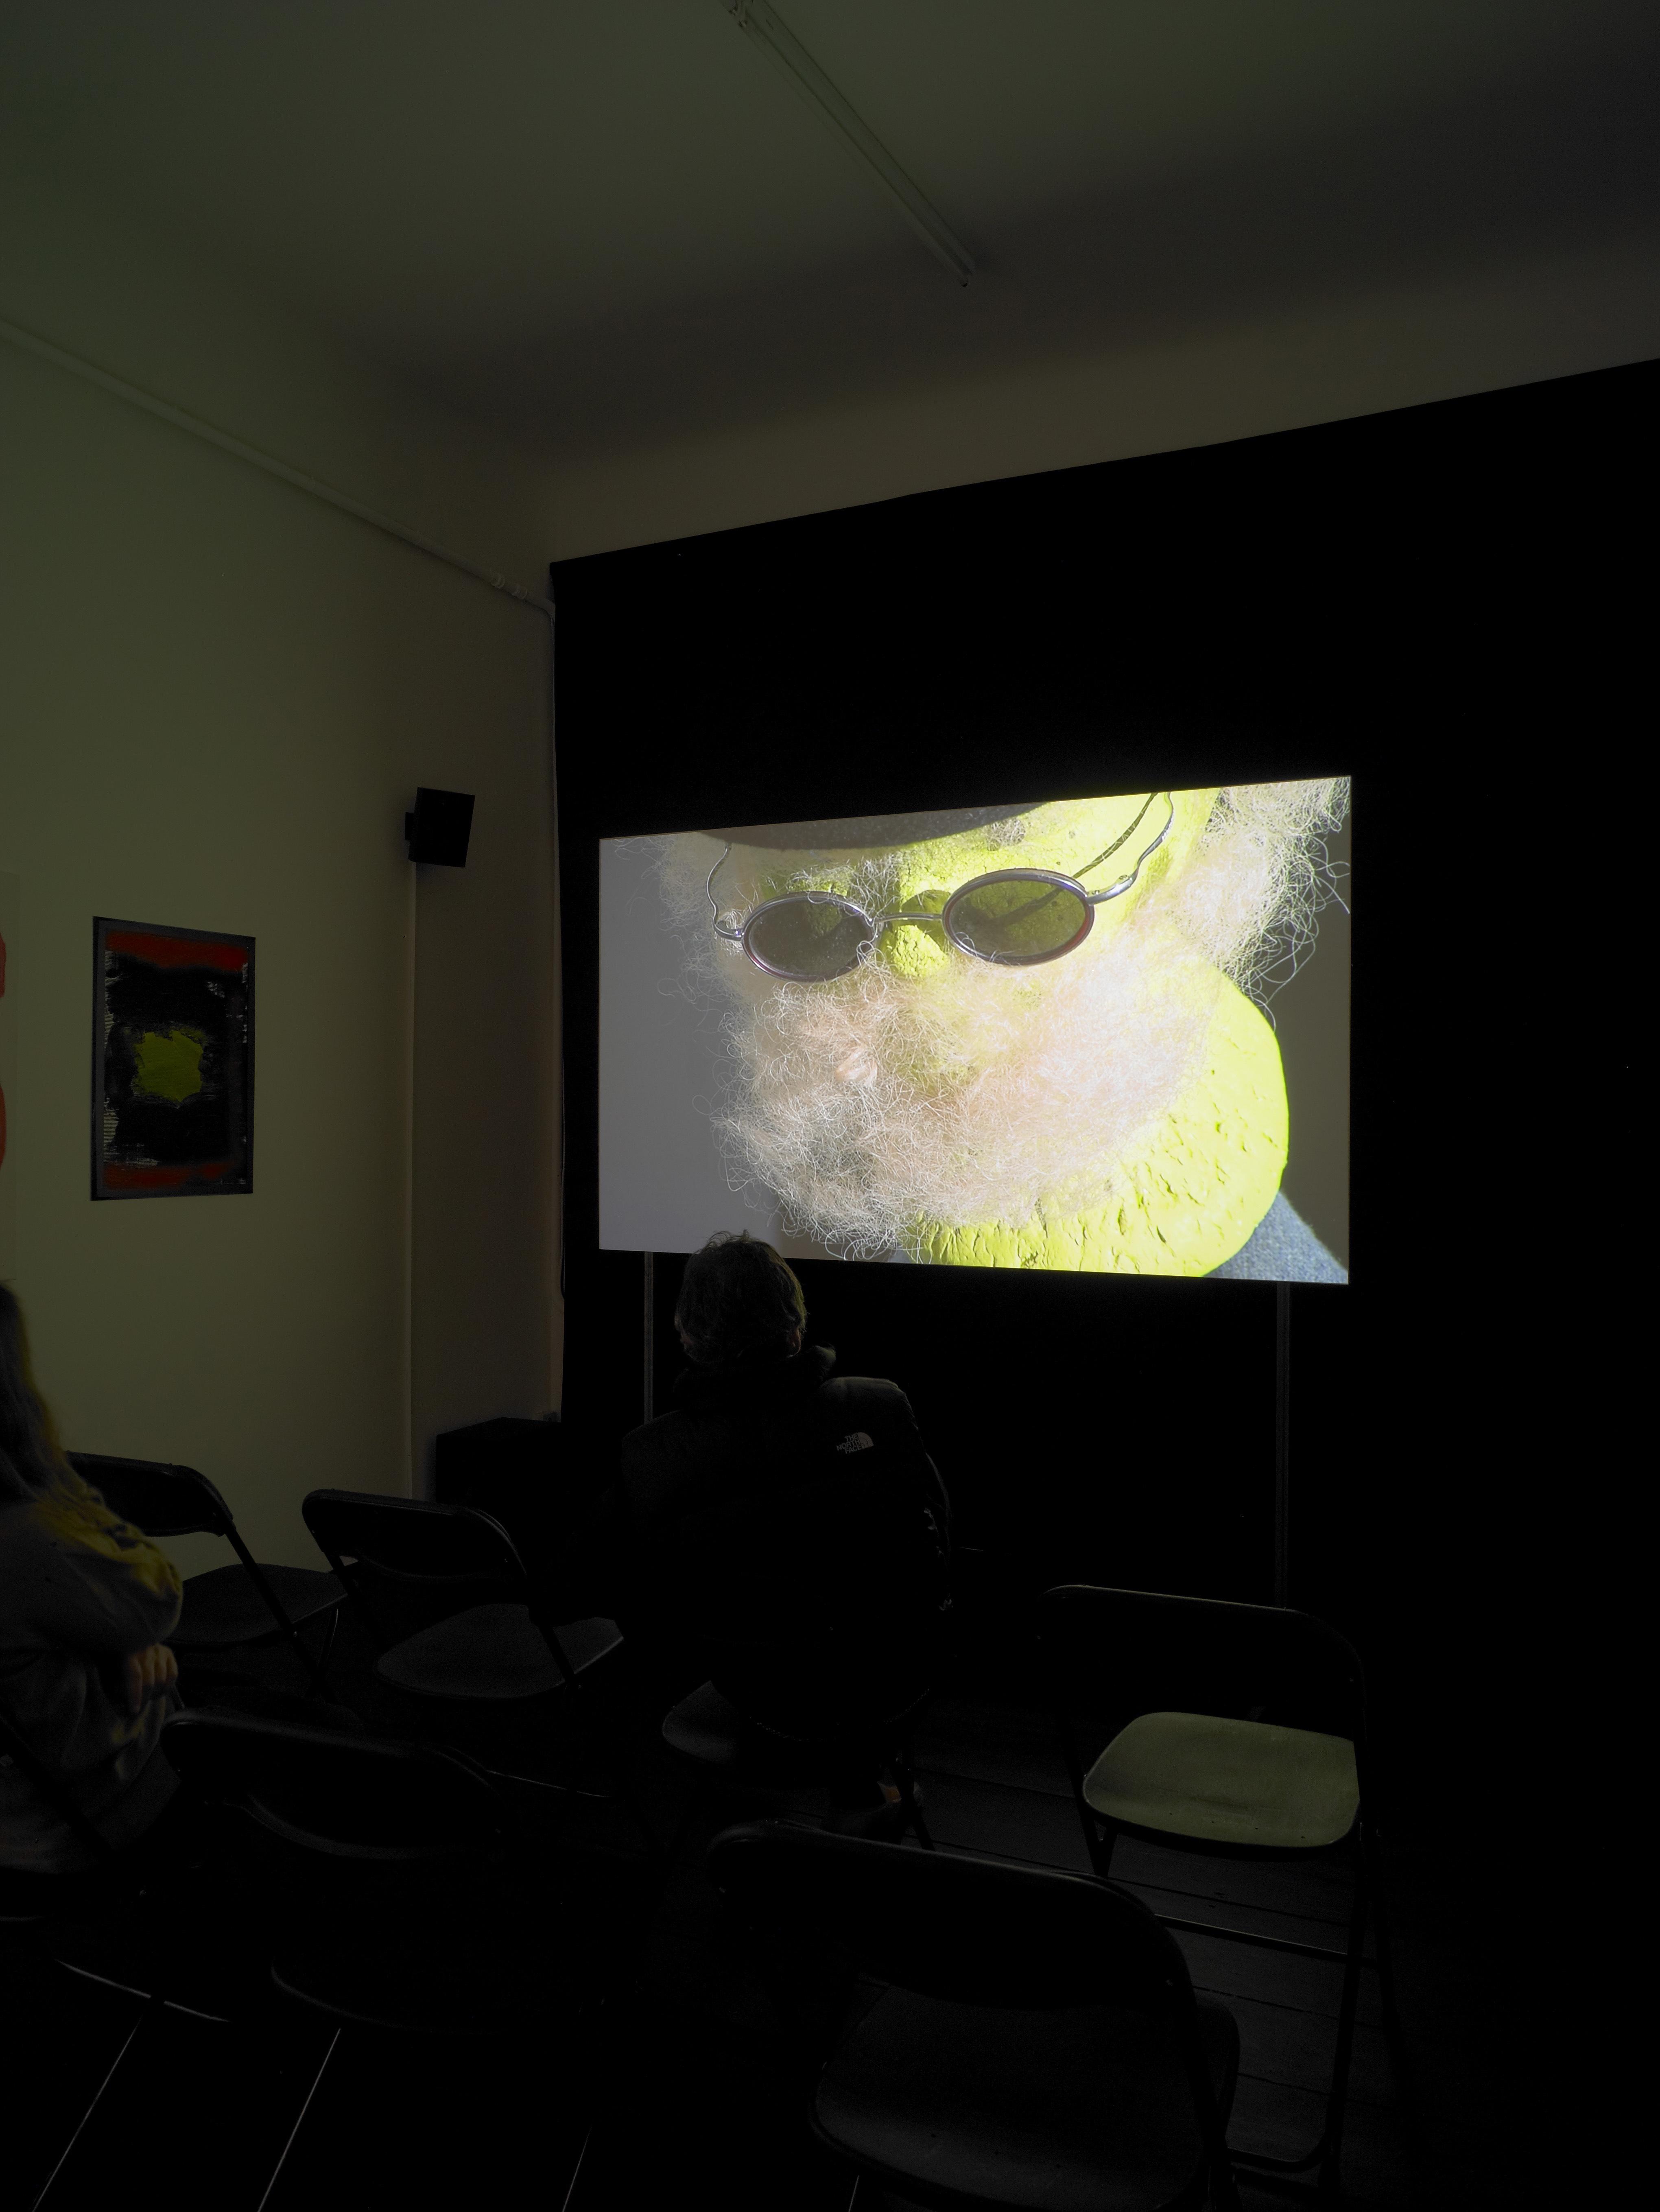 Installation view of video projection: a bright yellow object with sunglasses and tan fuzz that resembles a beard